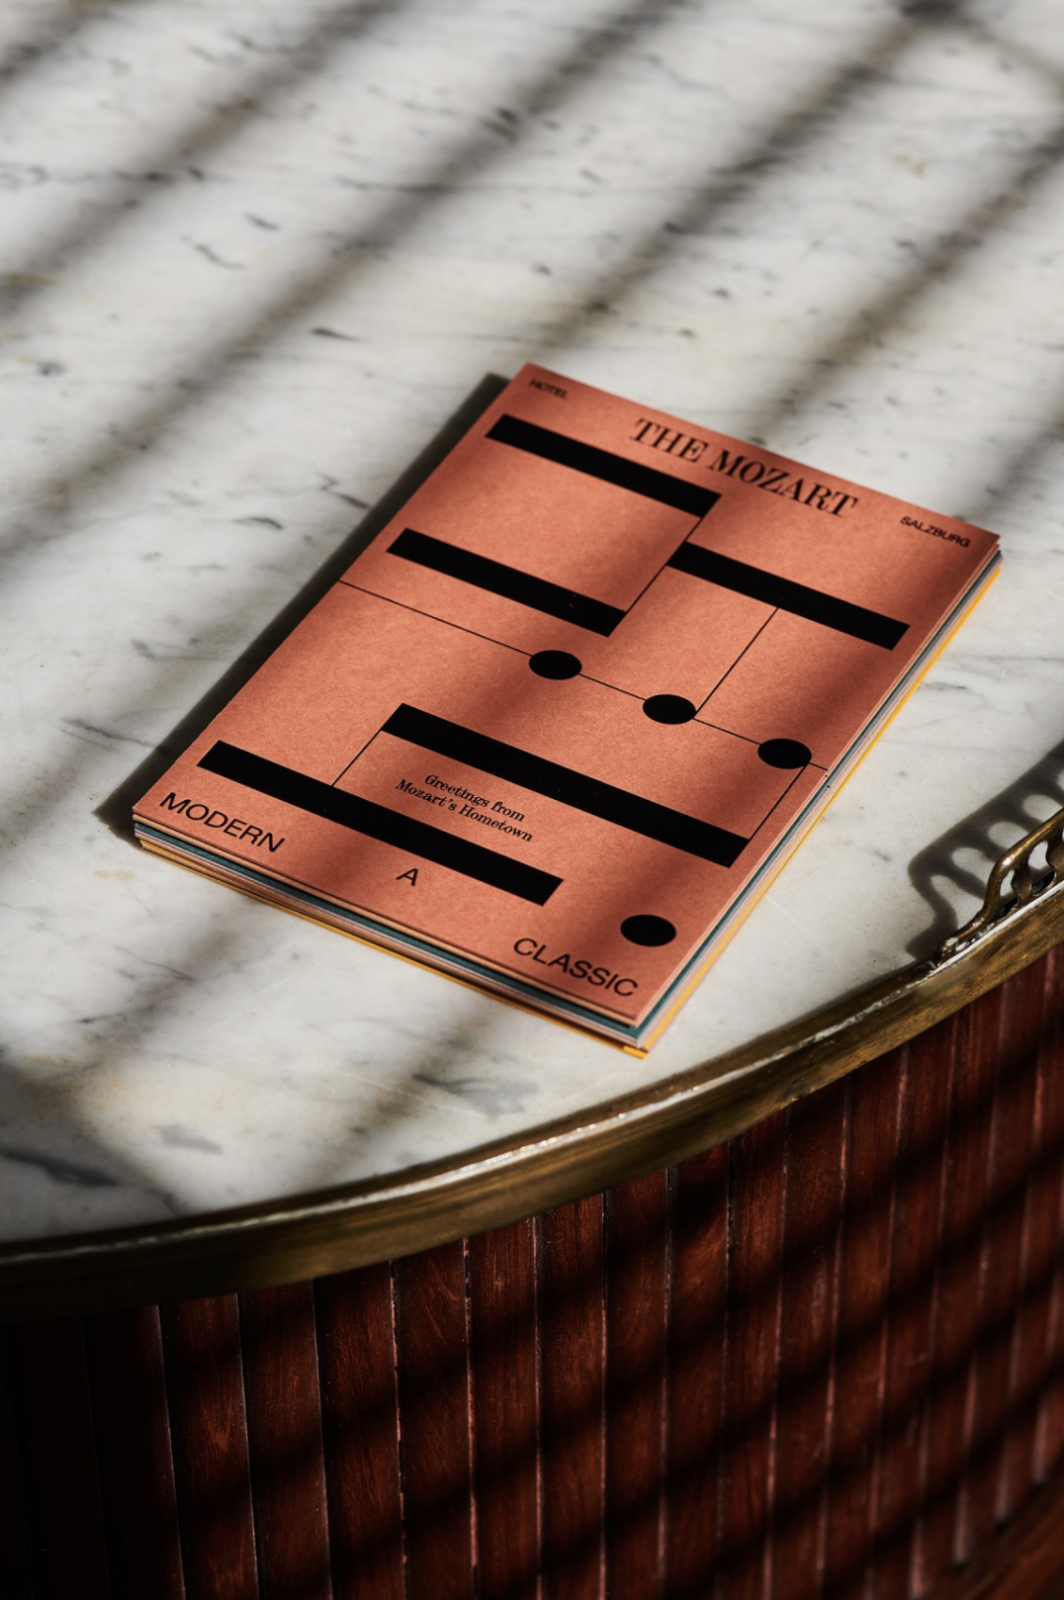 The Mozart Hotel Branding Combines Classical Notes with Contemporary Flair